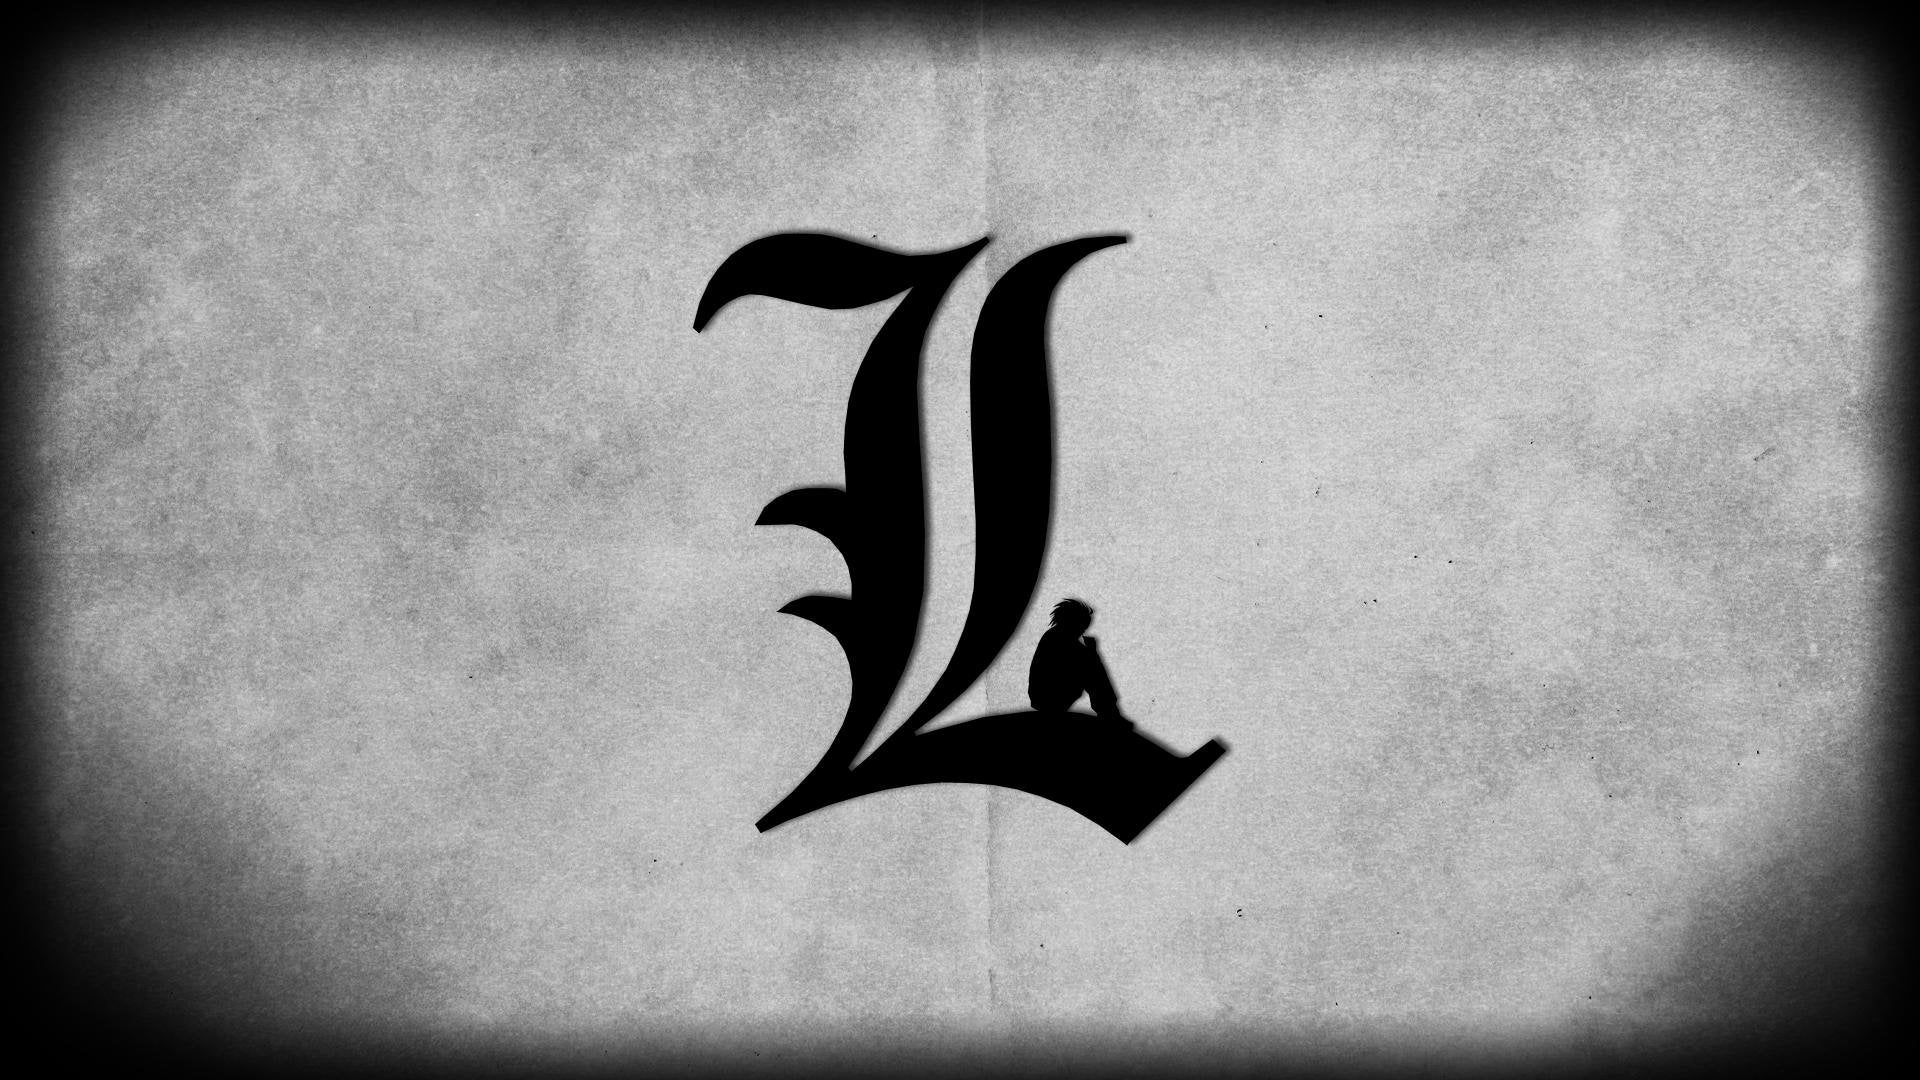 I made an L wallpaper from Deathnote. (1920x1080)